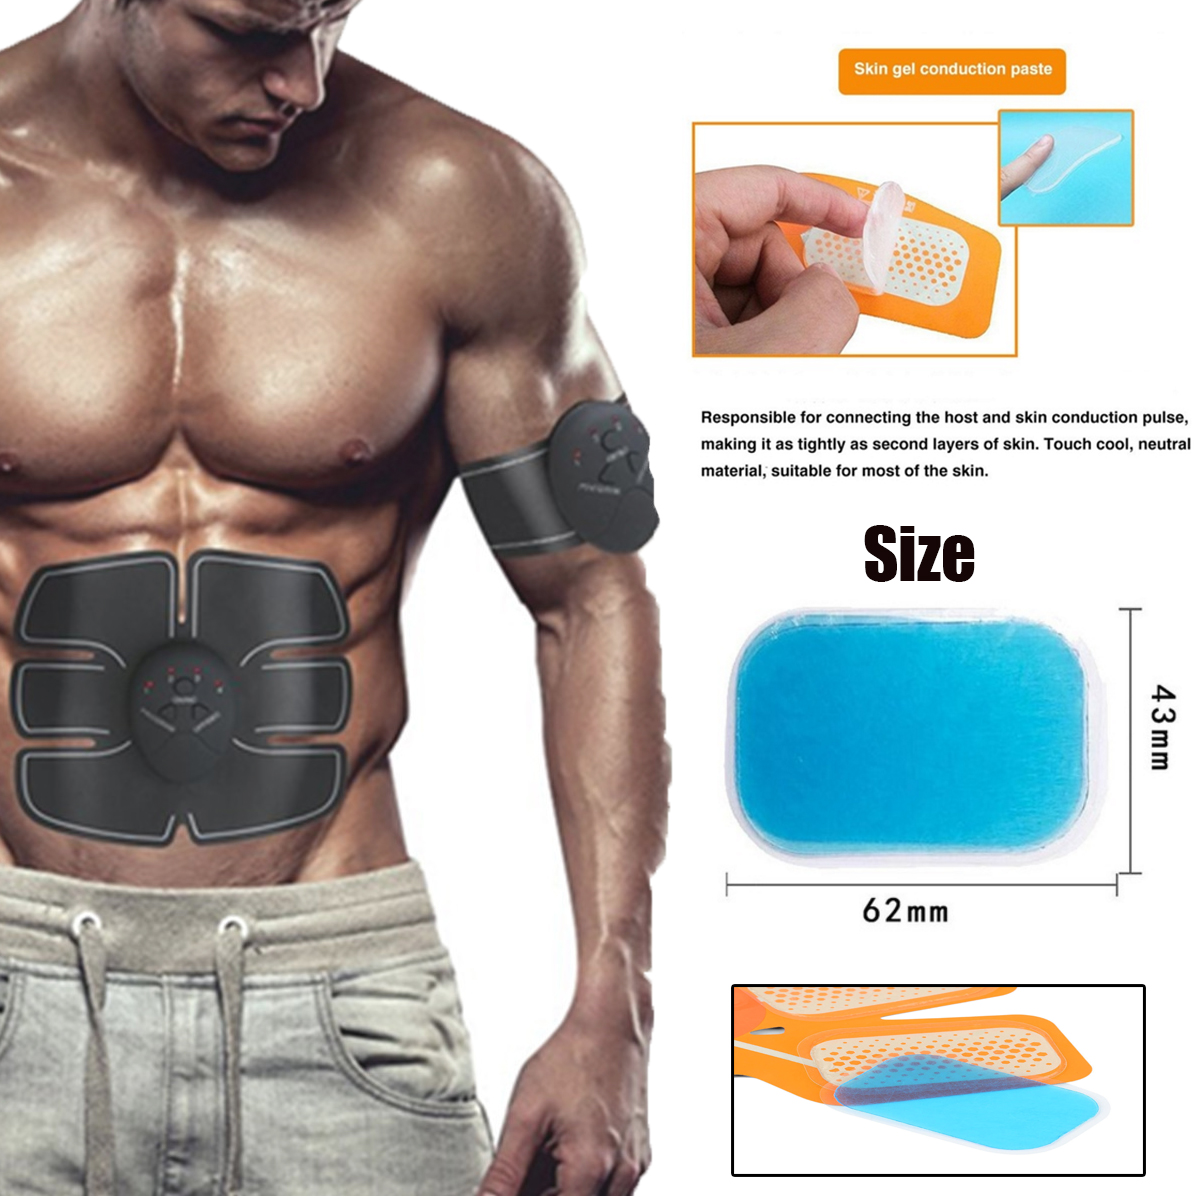 KALOAD-16PCSSet-Blue-Replacement-Gel-For-Abdominal-Muscle-Training-Pads-Gear-Fitness-Massage-1418270